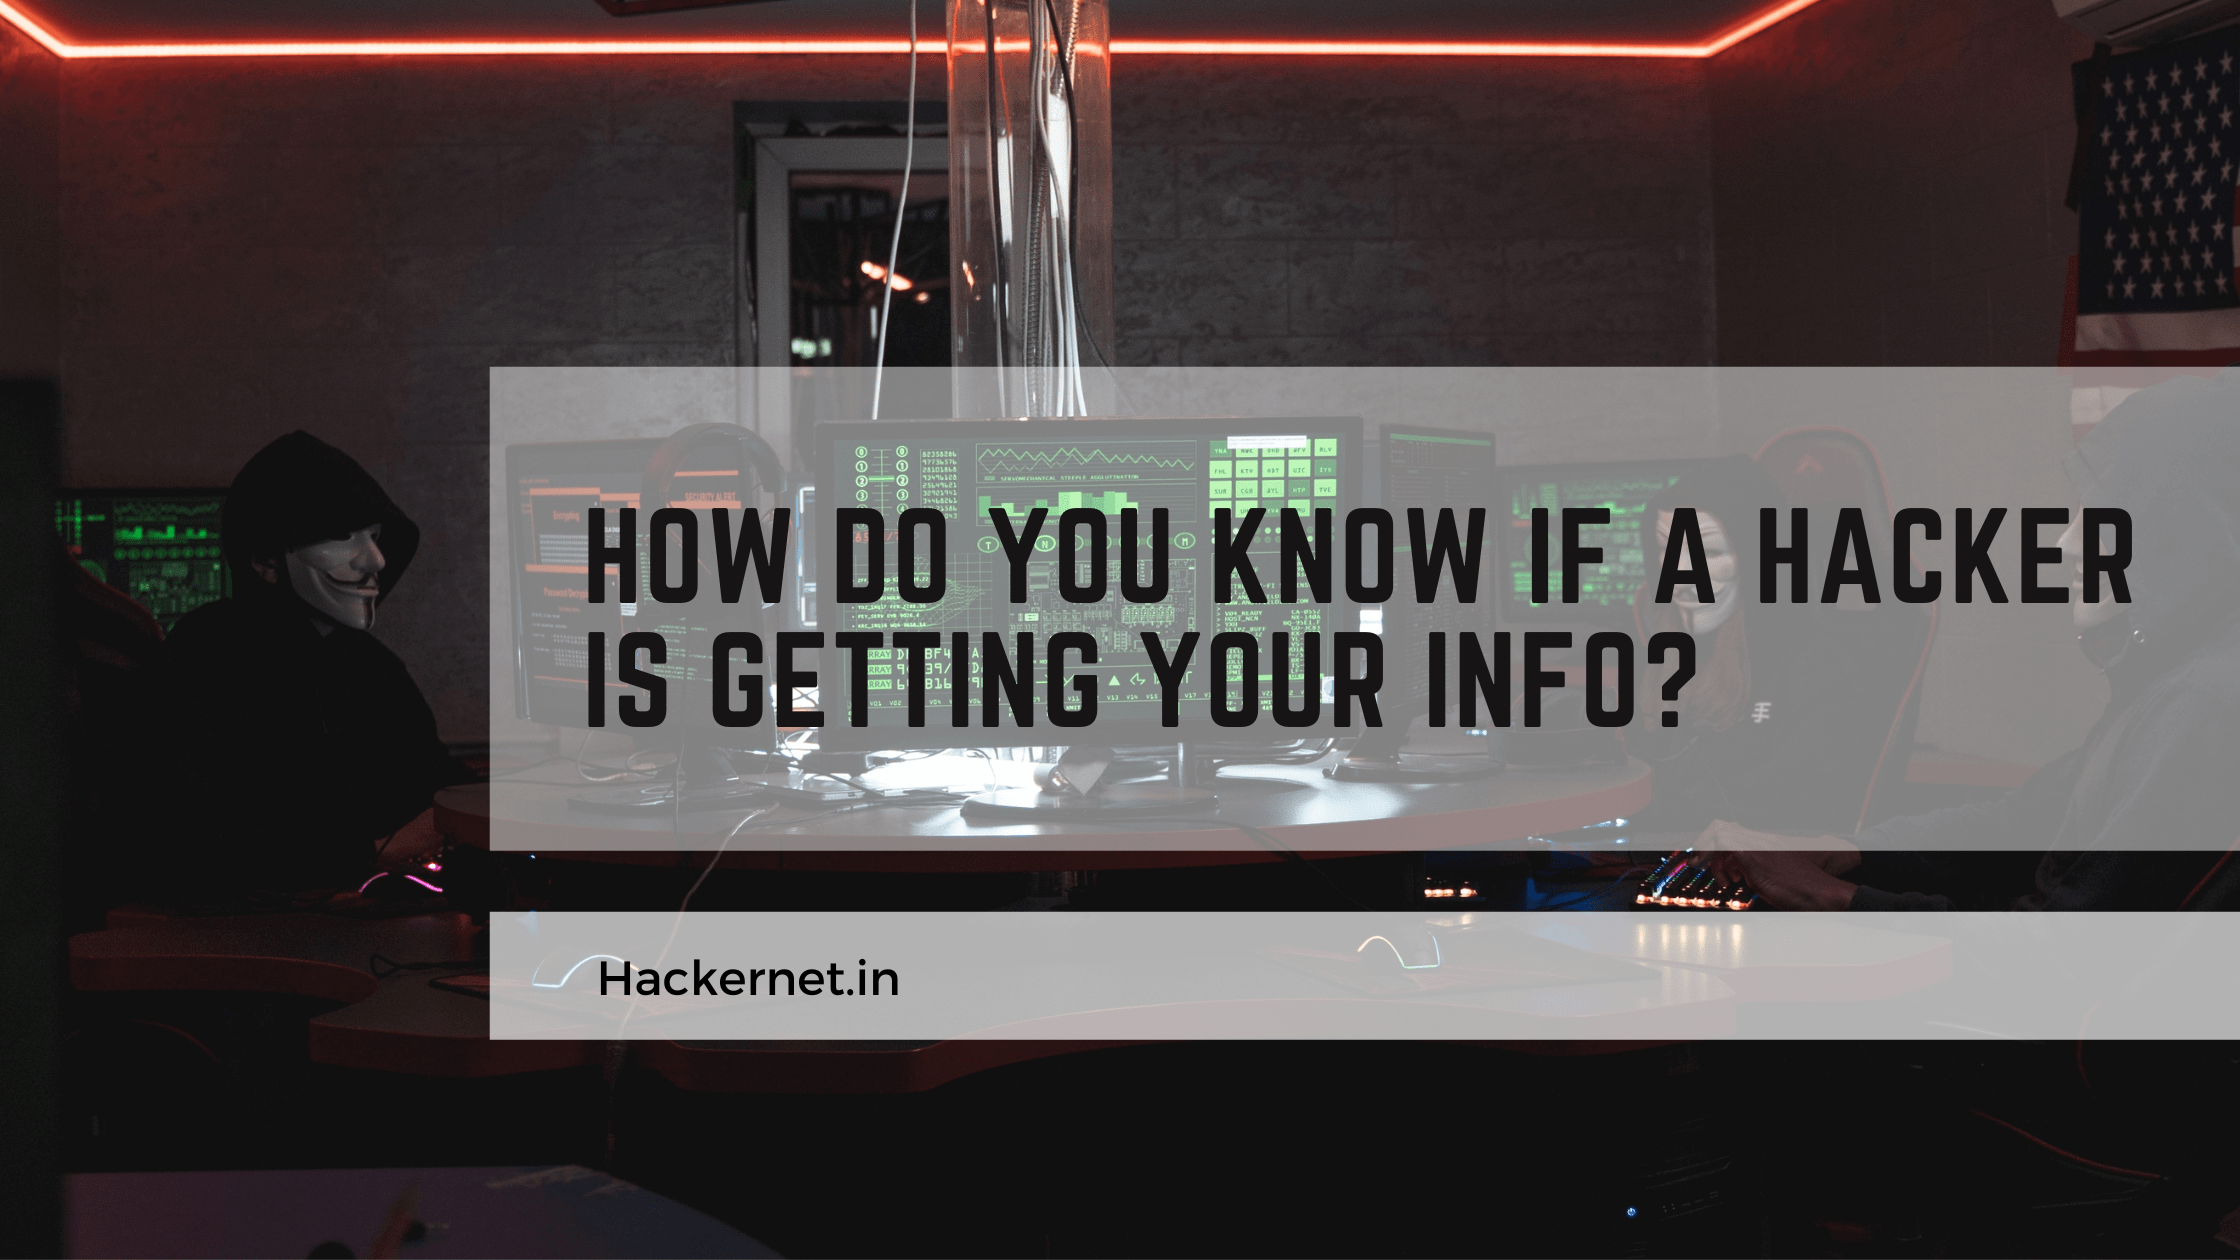 How do you know if a hacker is getting your info?